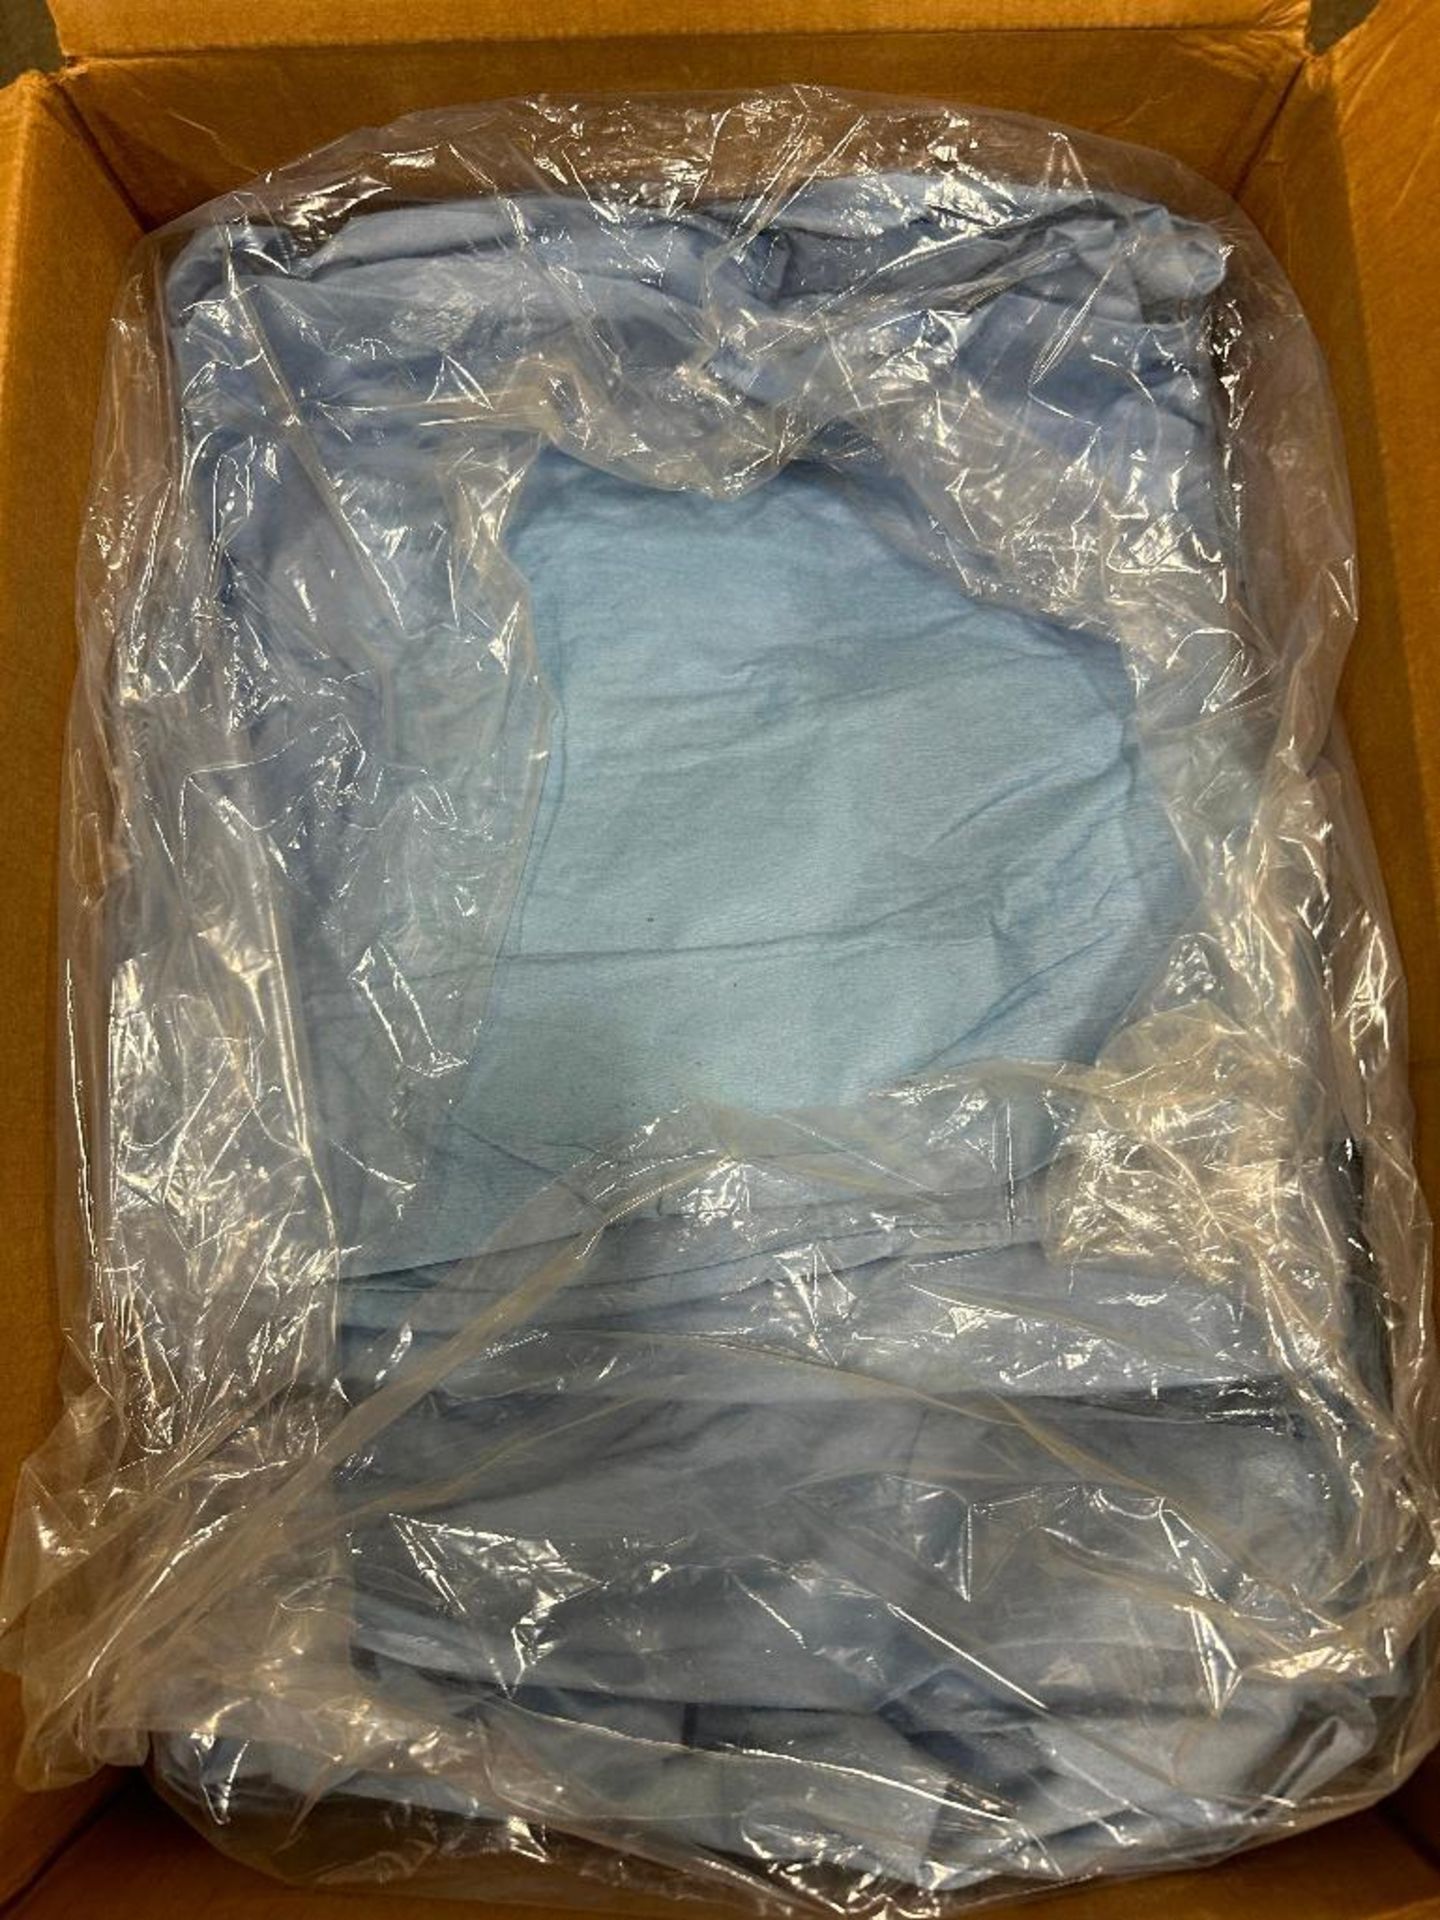 Box of XL Tyvek Disposable Coveralls - Image 2 of 3